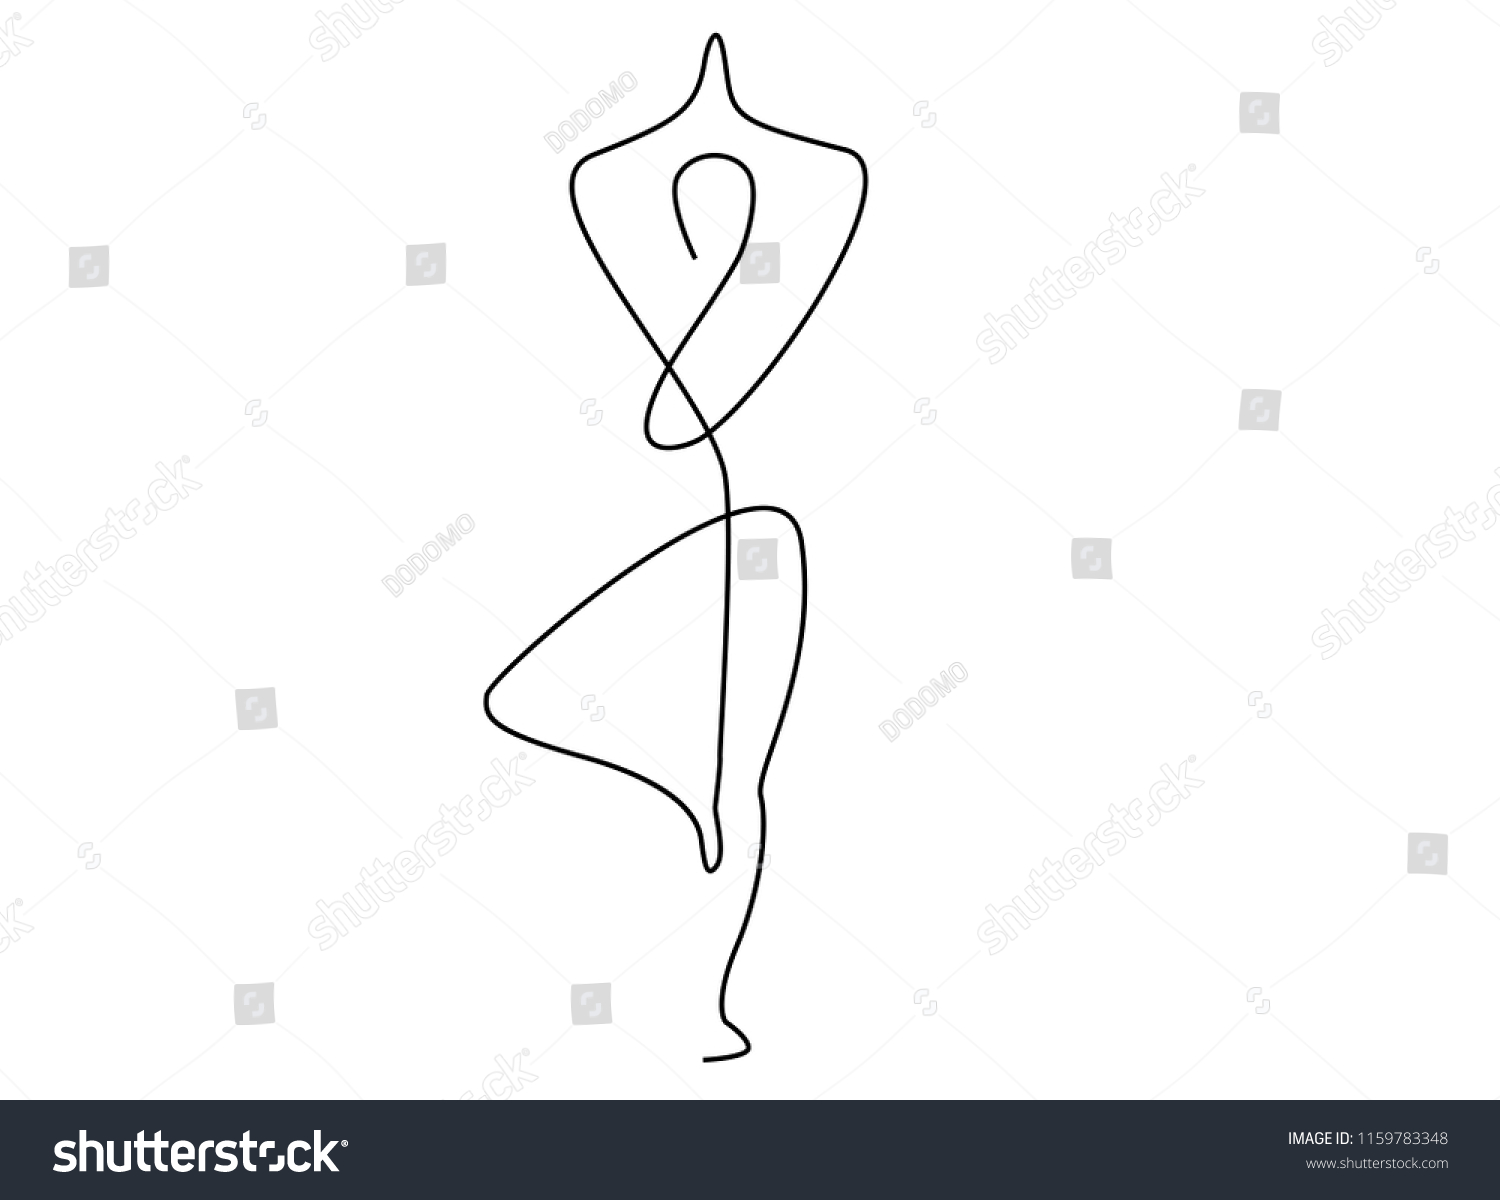 SVG of continuous line drawing of women fitness yoga concept vector health illustration
International Day of Yoga svg